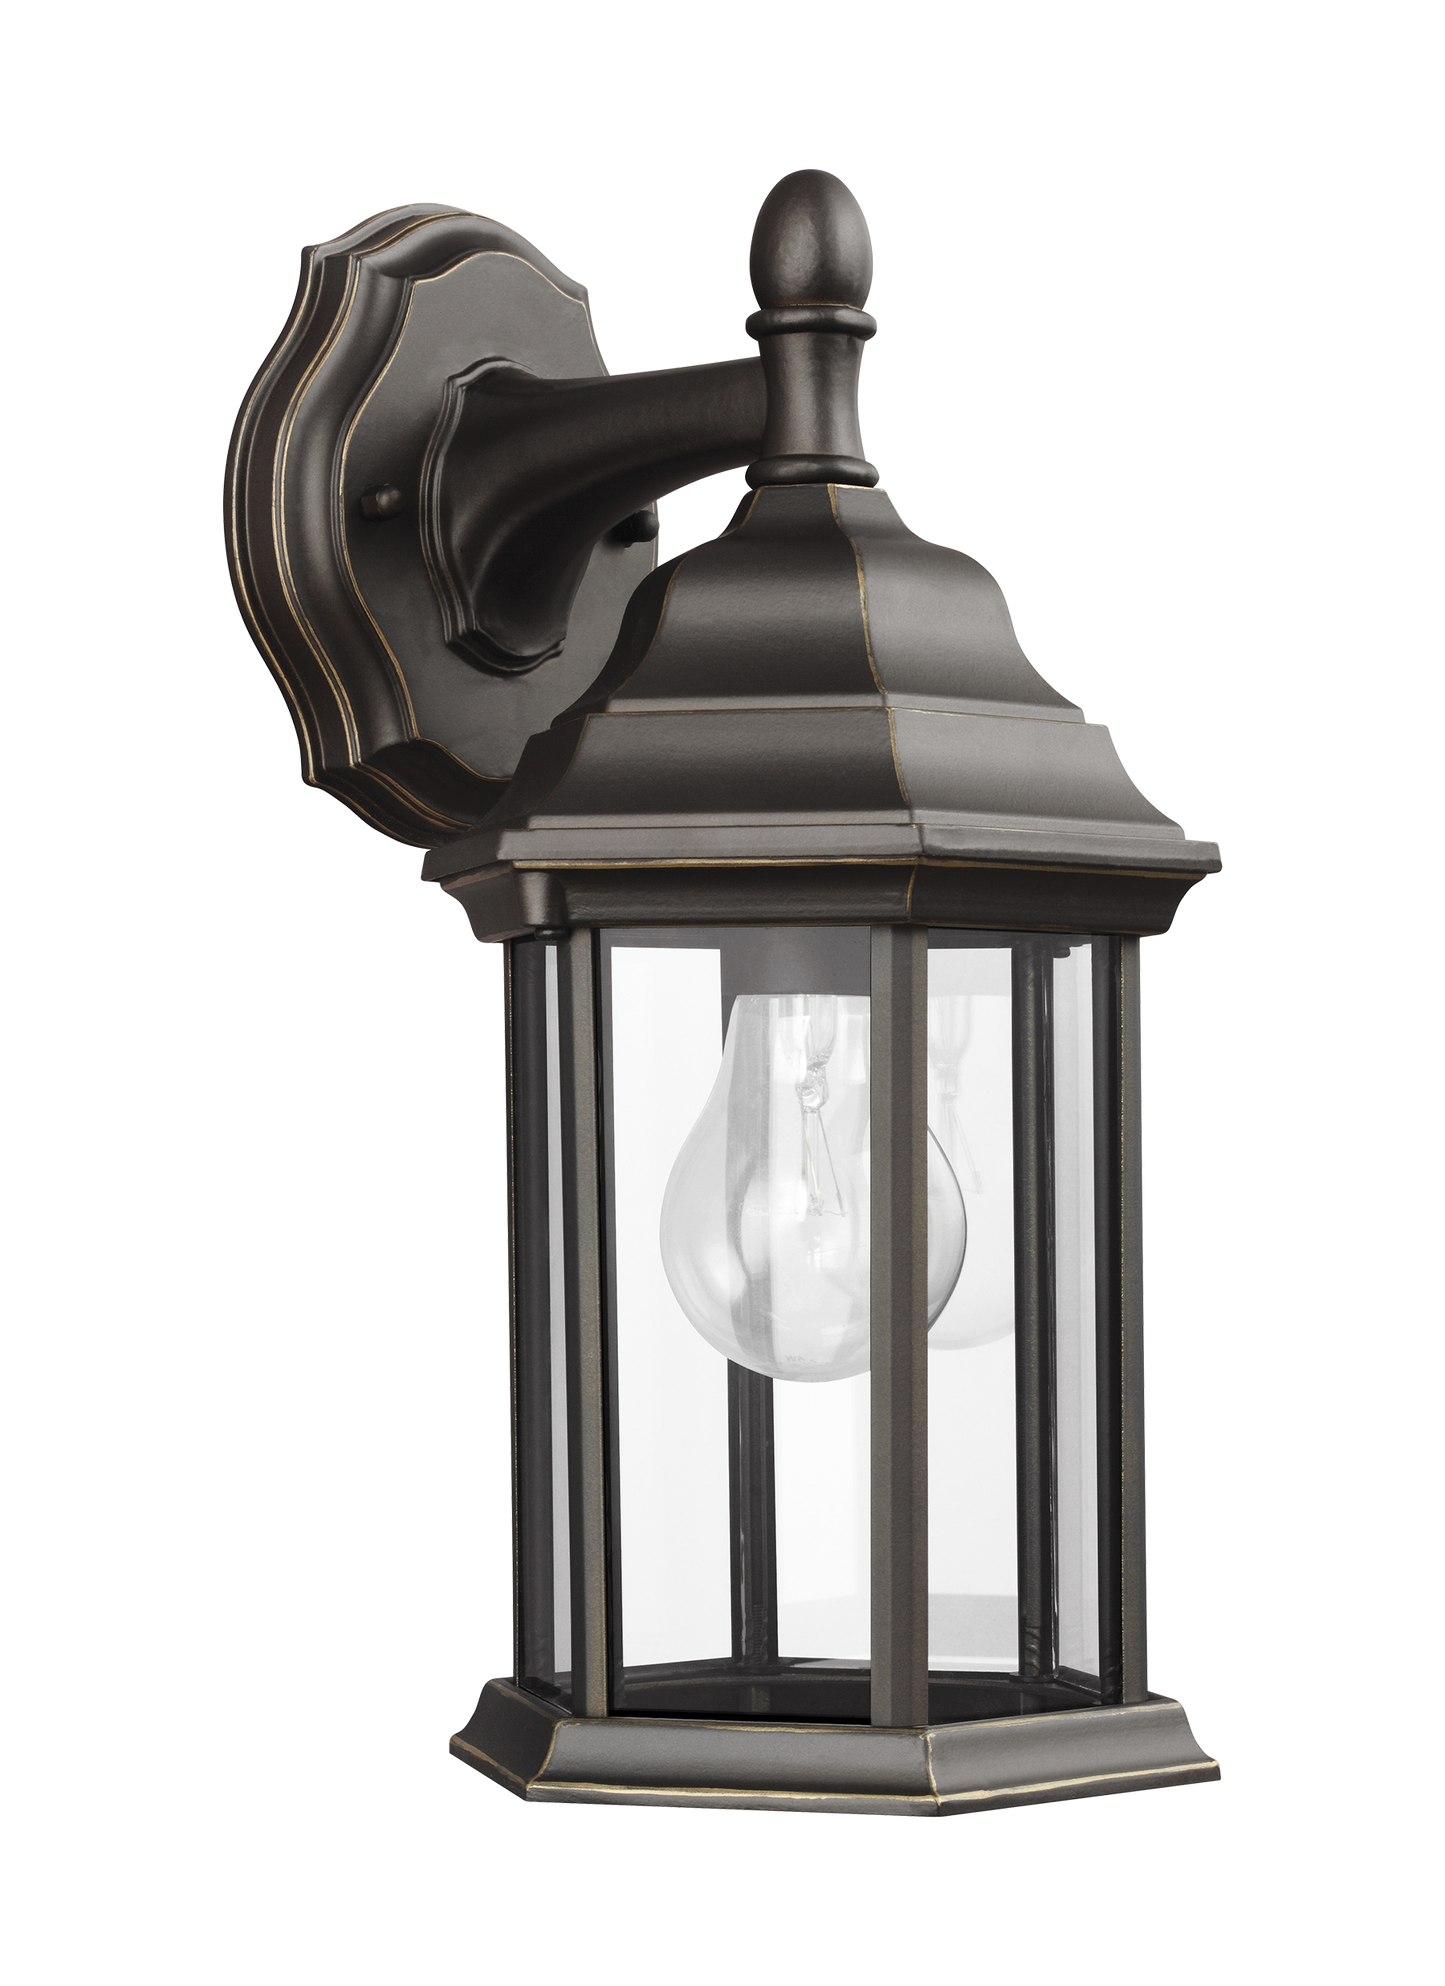 Sevier traditional 1-light outdoor exterior small downlight outdoor wall lantern sconce in antique bronze finish with clea...